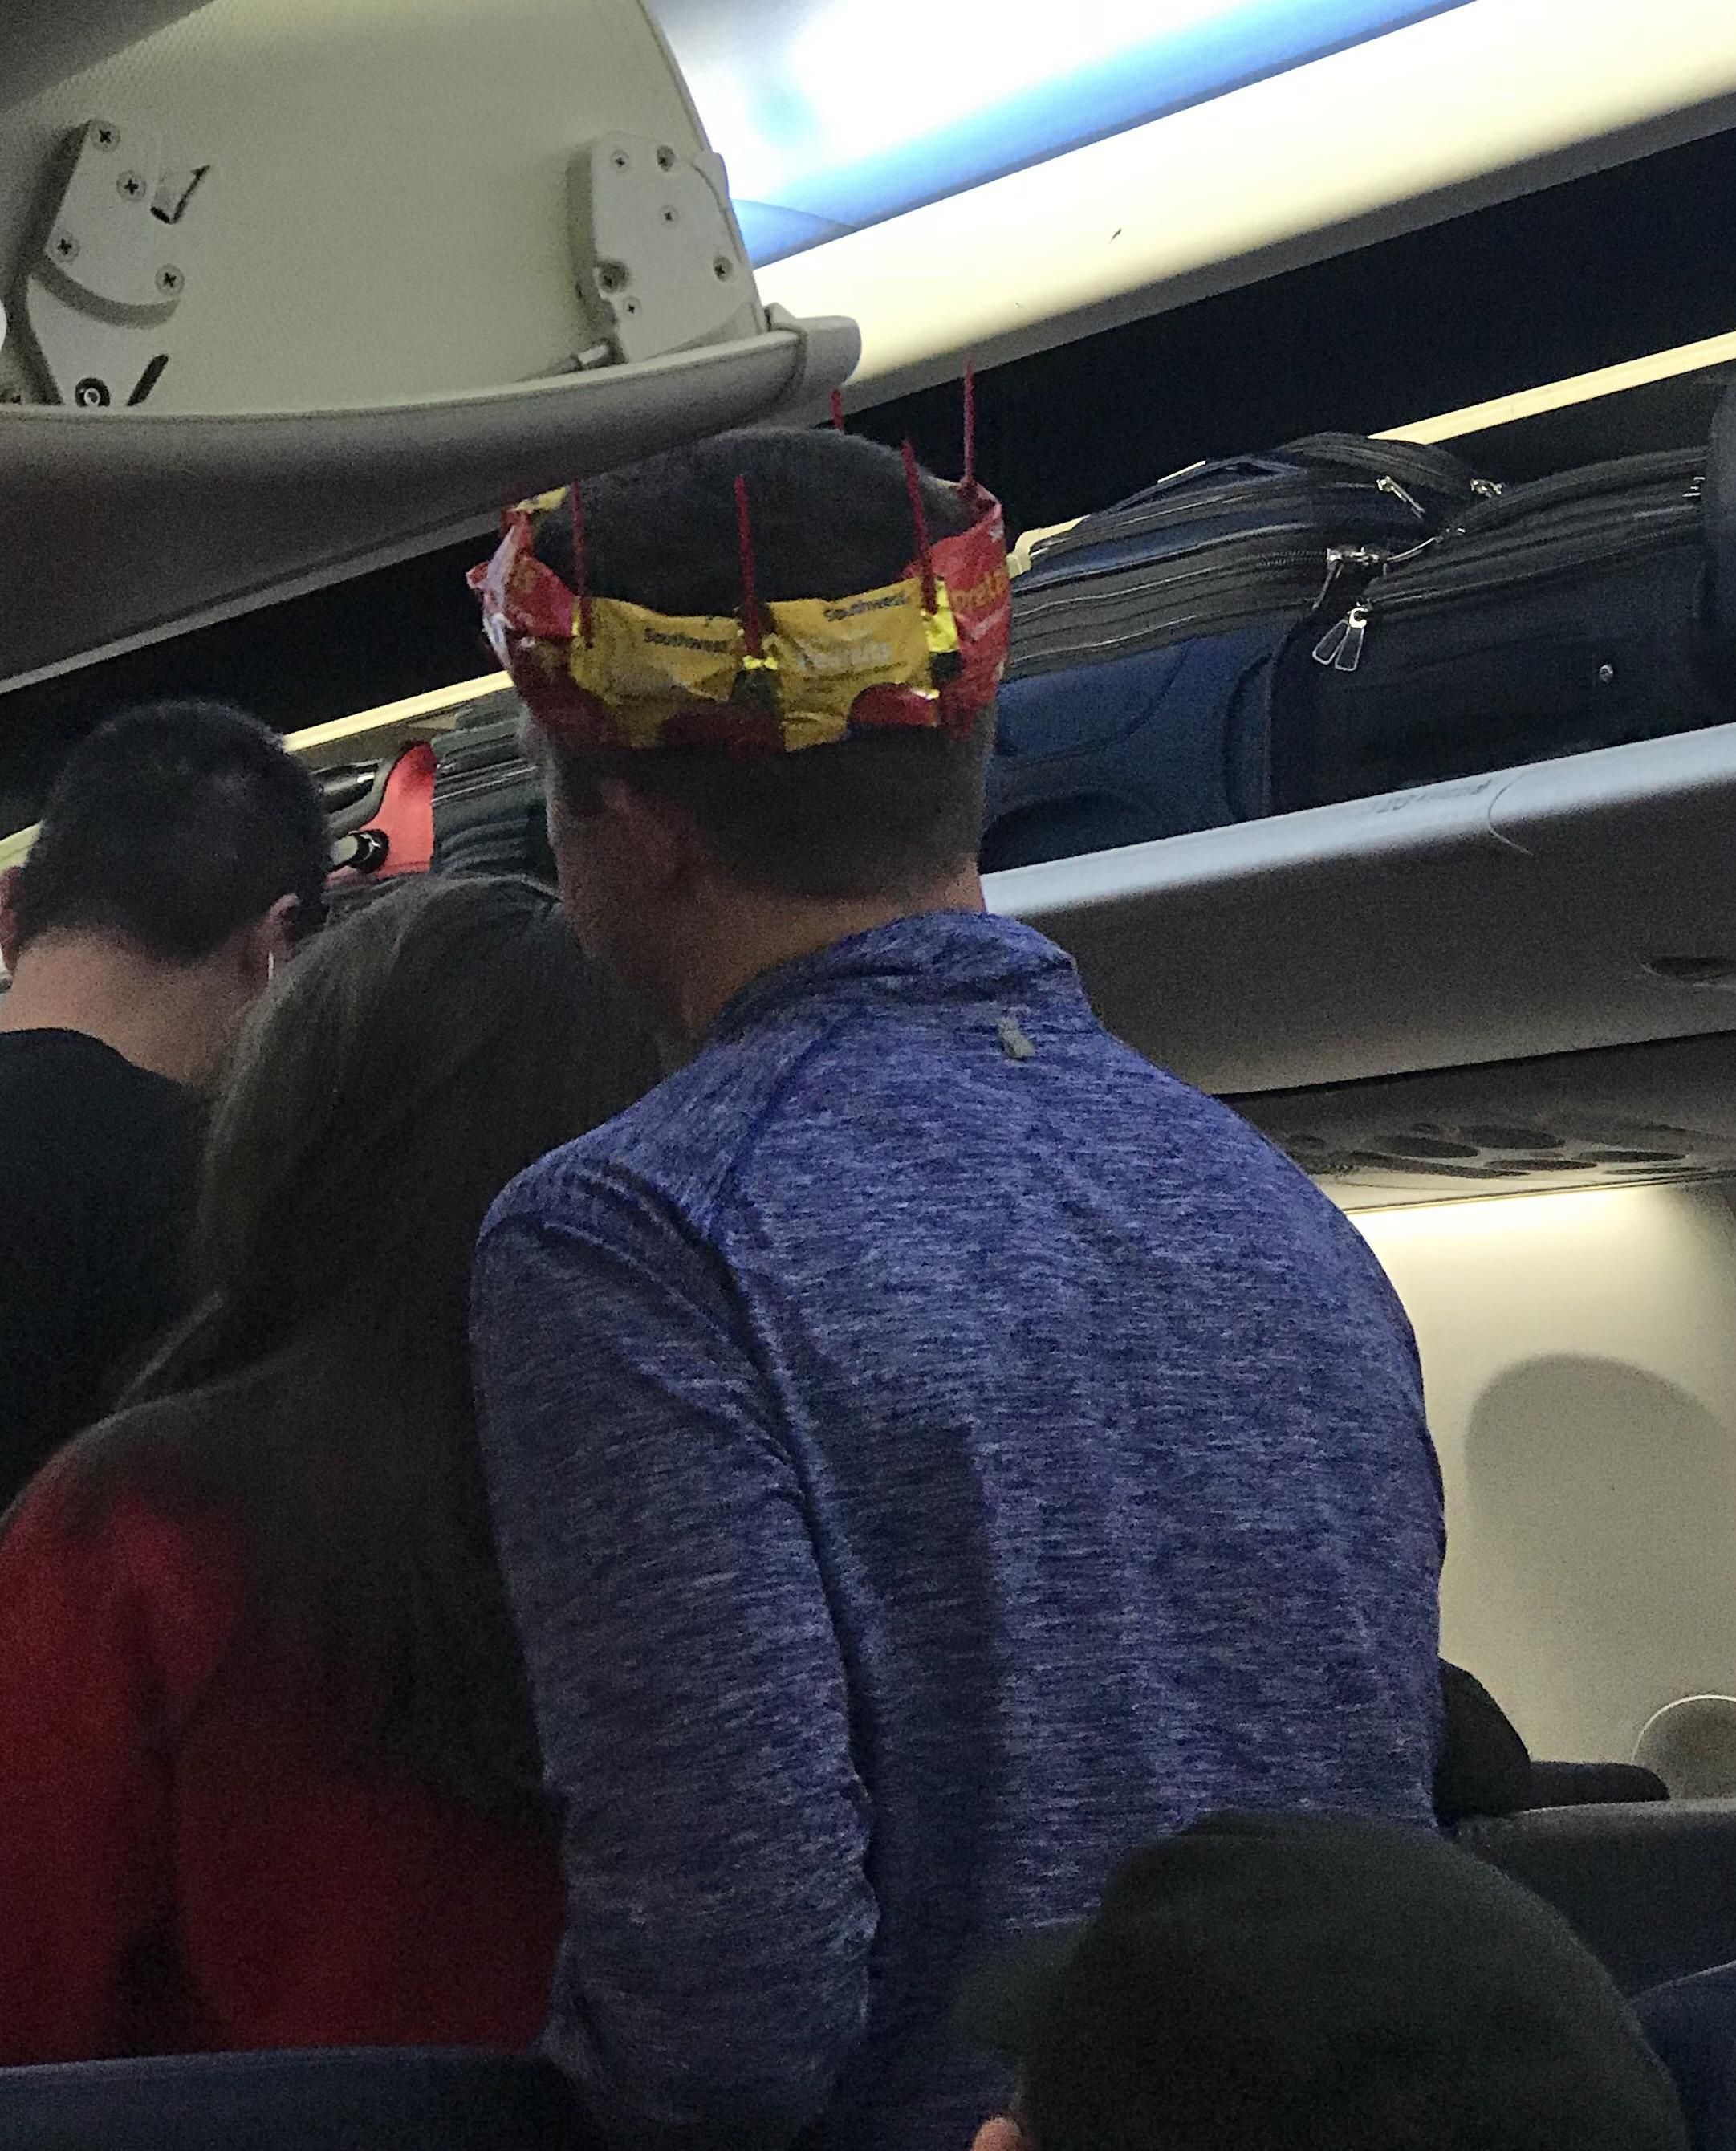 Today on my flight it was a passengers birthday, so a flight attendant made him a crown out of peanut bags and those little swords that they put in ***tail drinks.